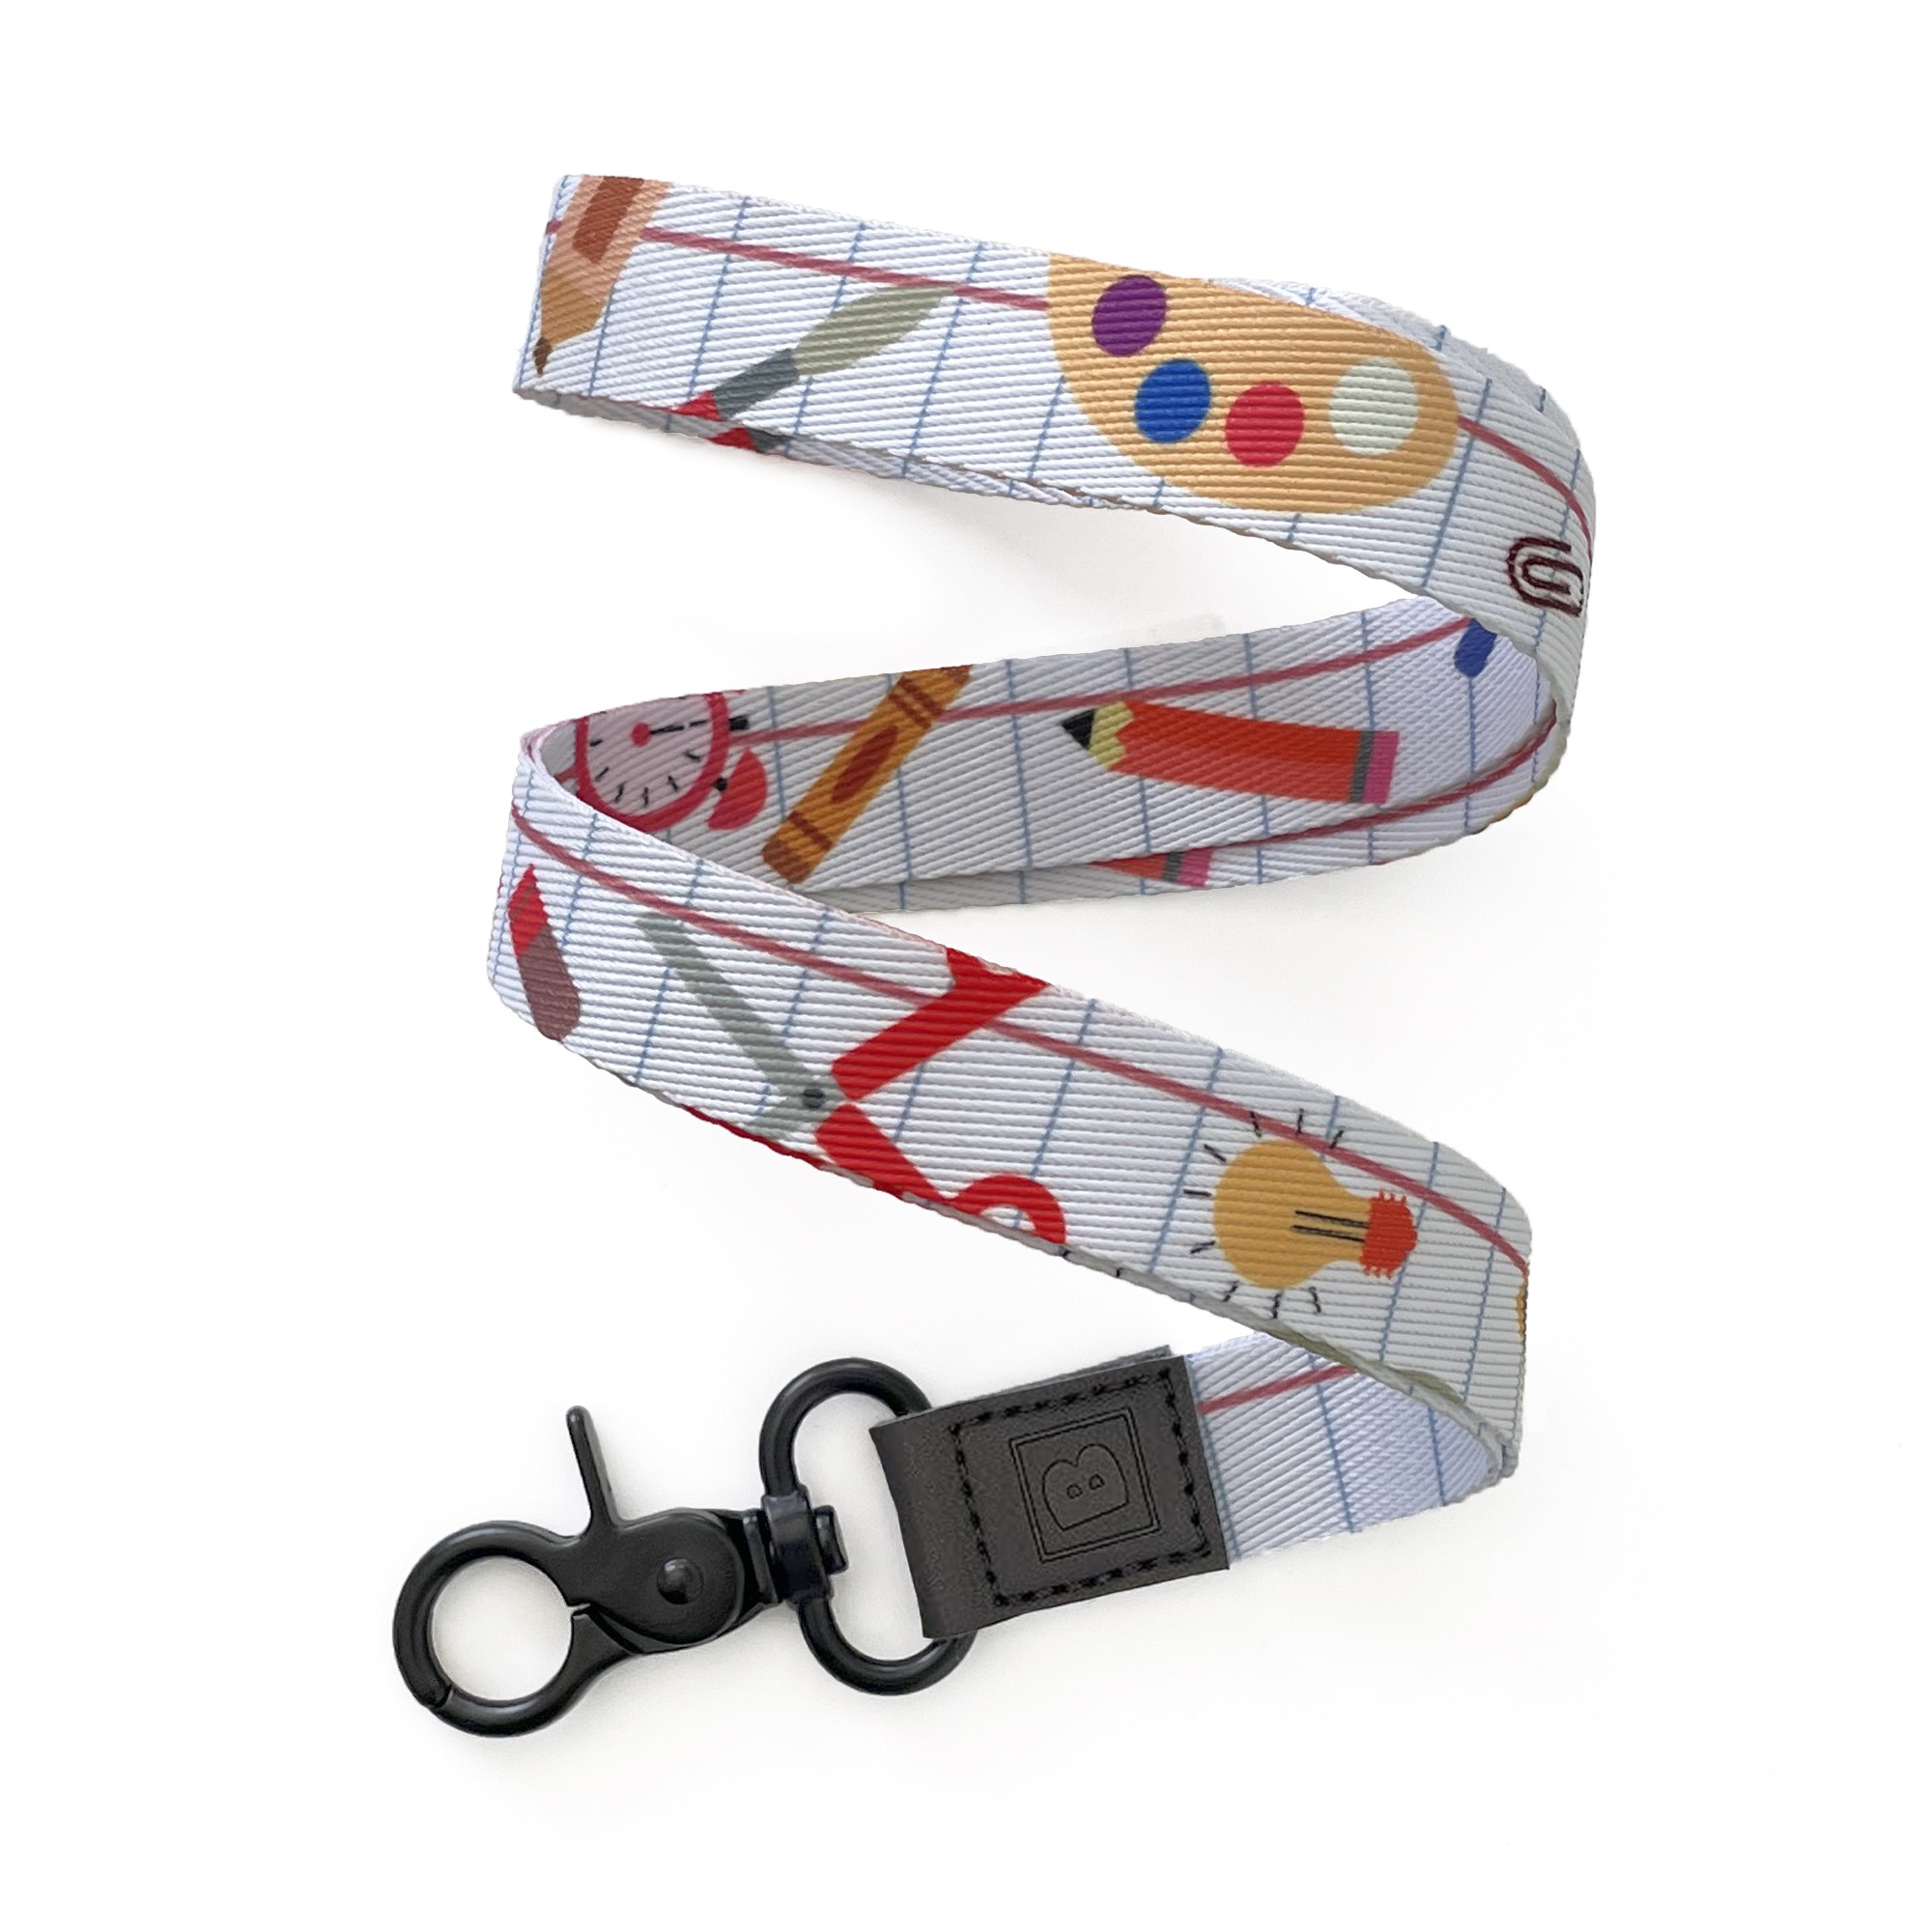 Notebook Whiz: White Lanyard with Educational Icons pattern – Channel Your Scholarly Spirit! by BadgeZoo